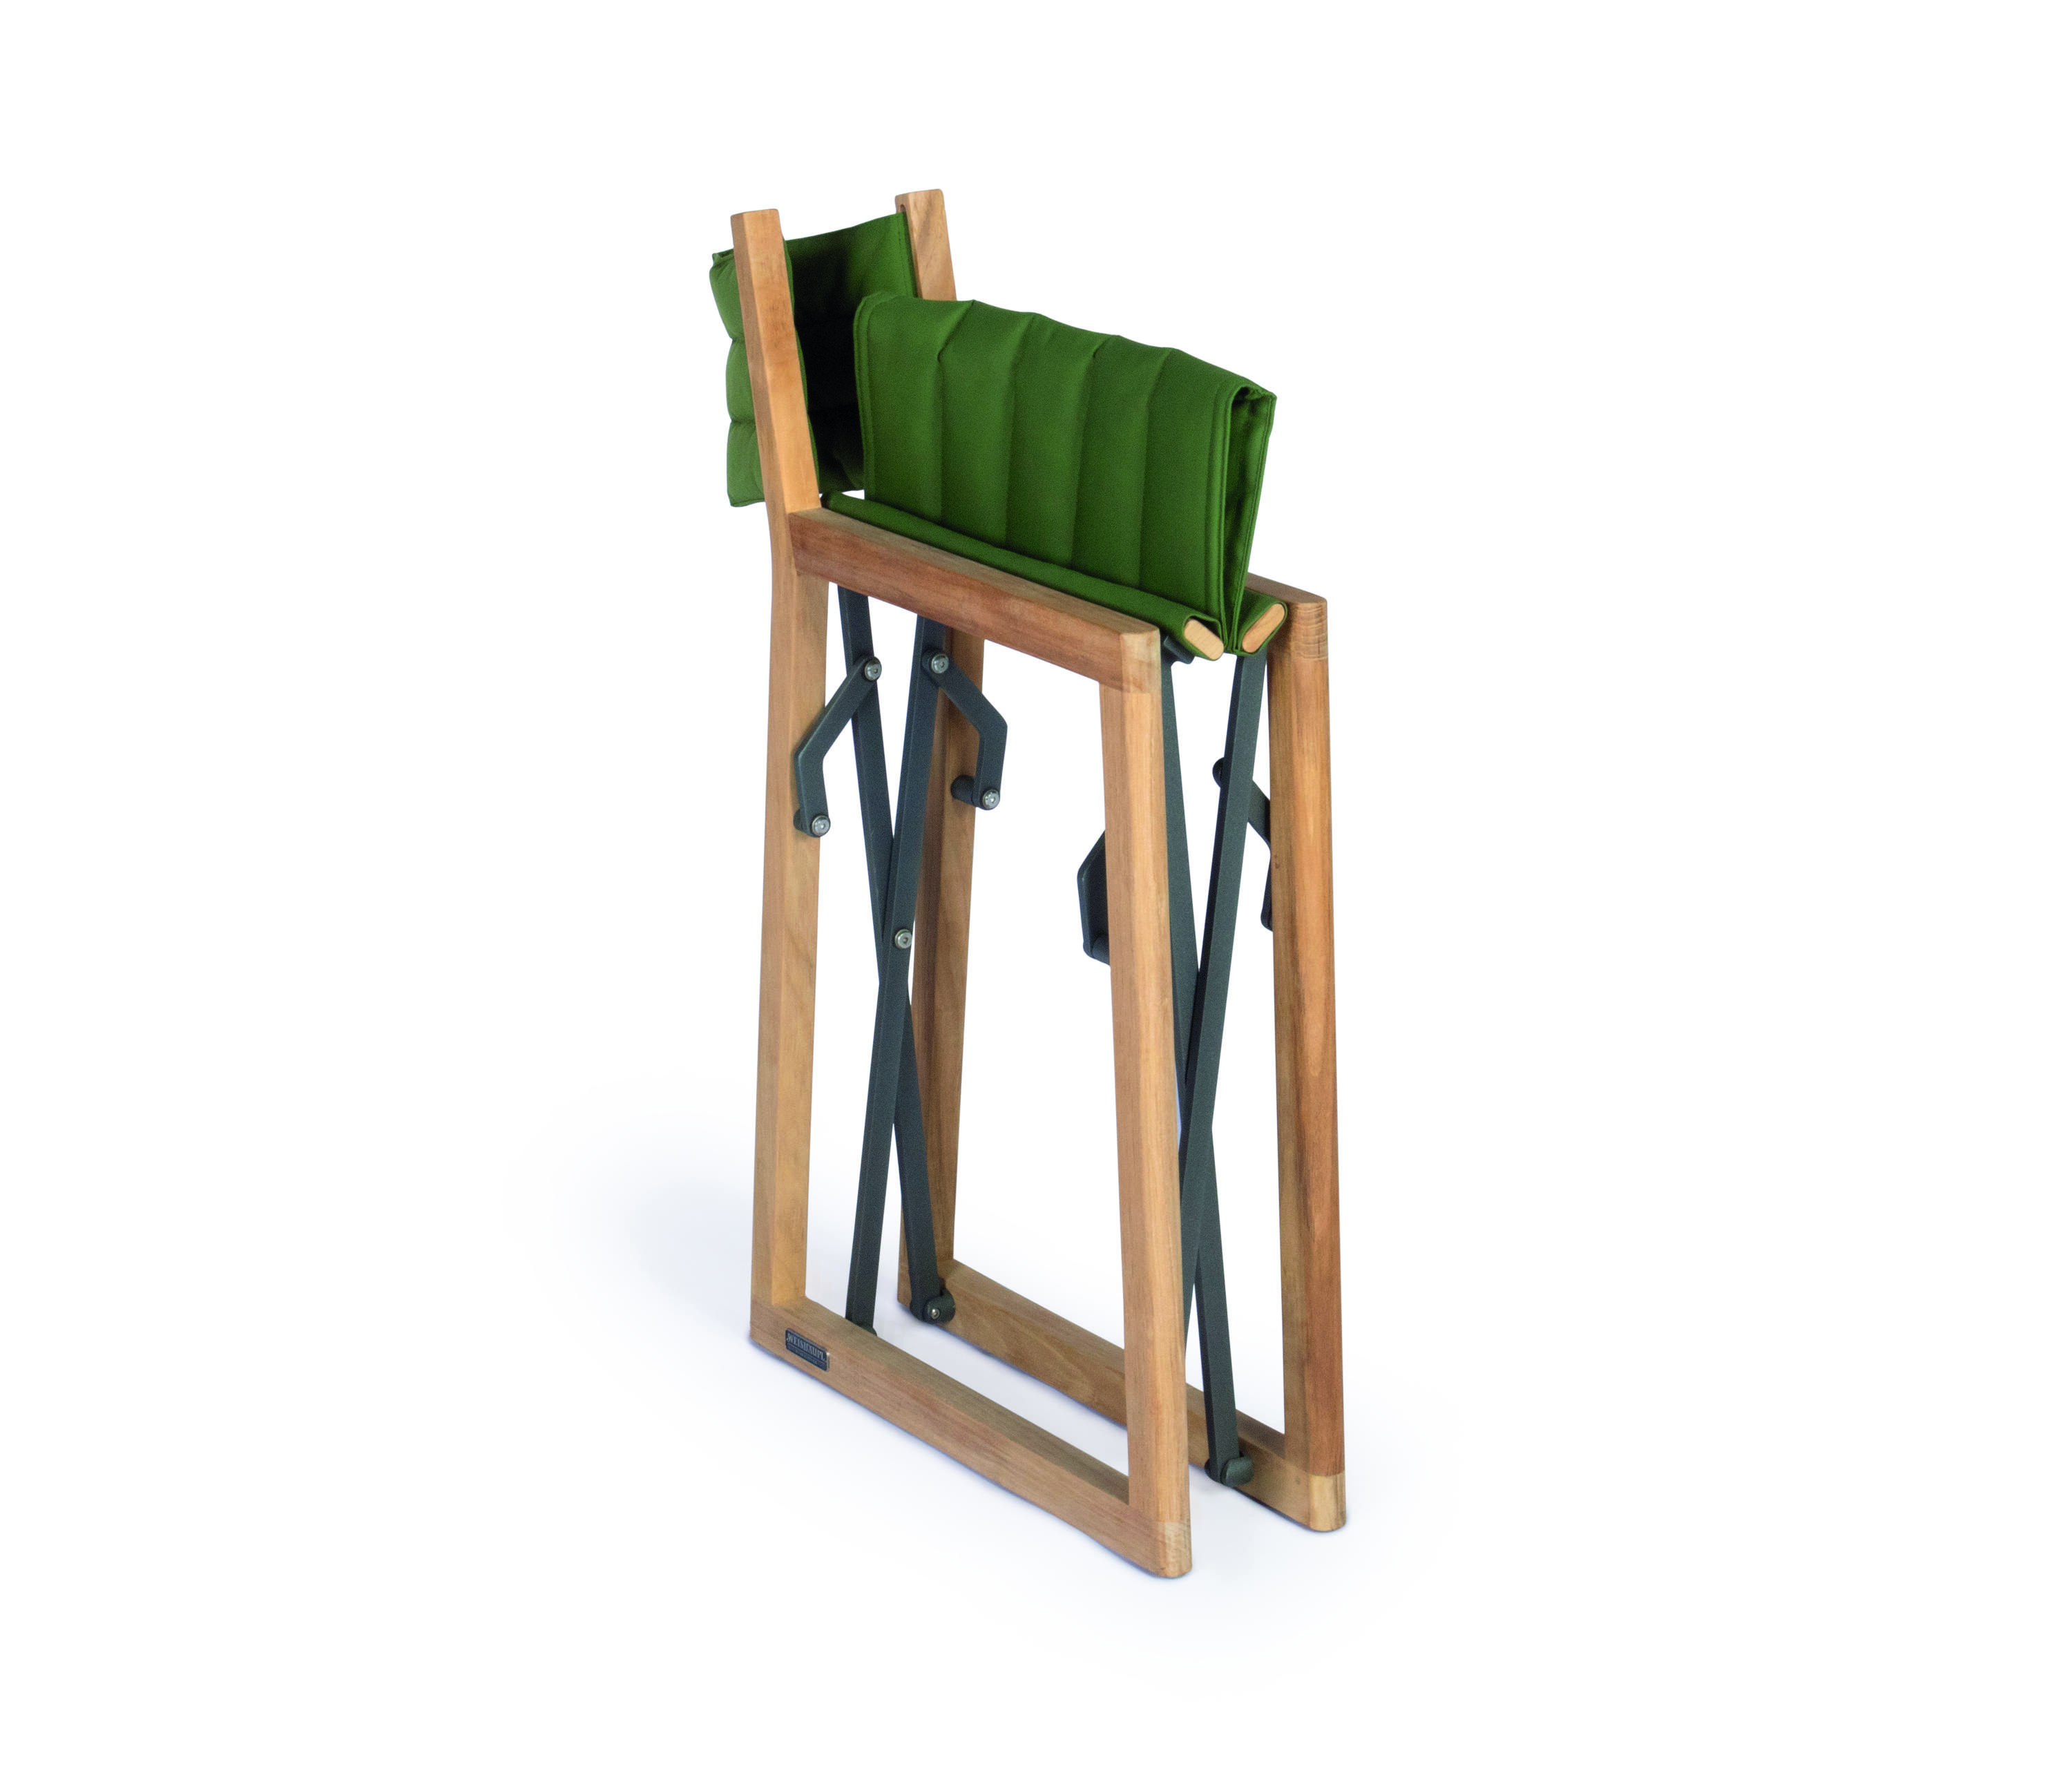 Seat Cushion for Loft Bench and Chair by Weishäupl